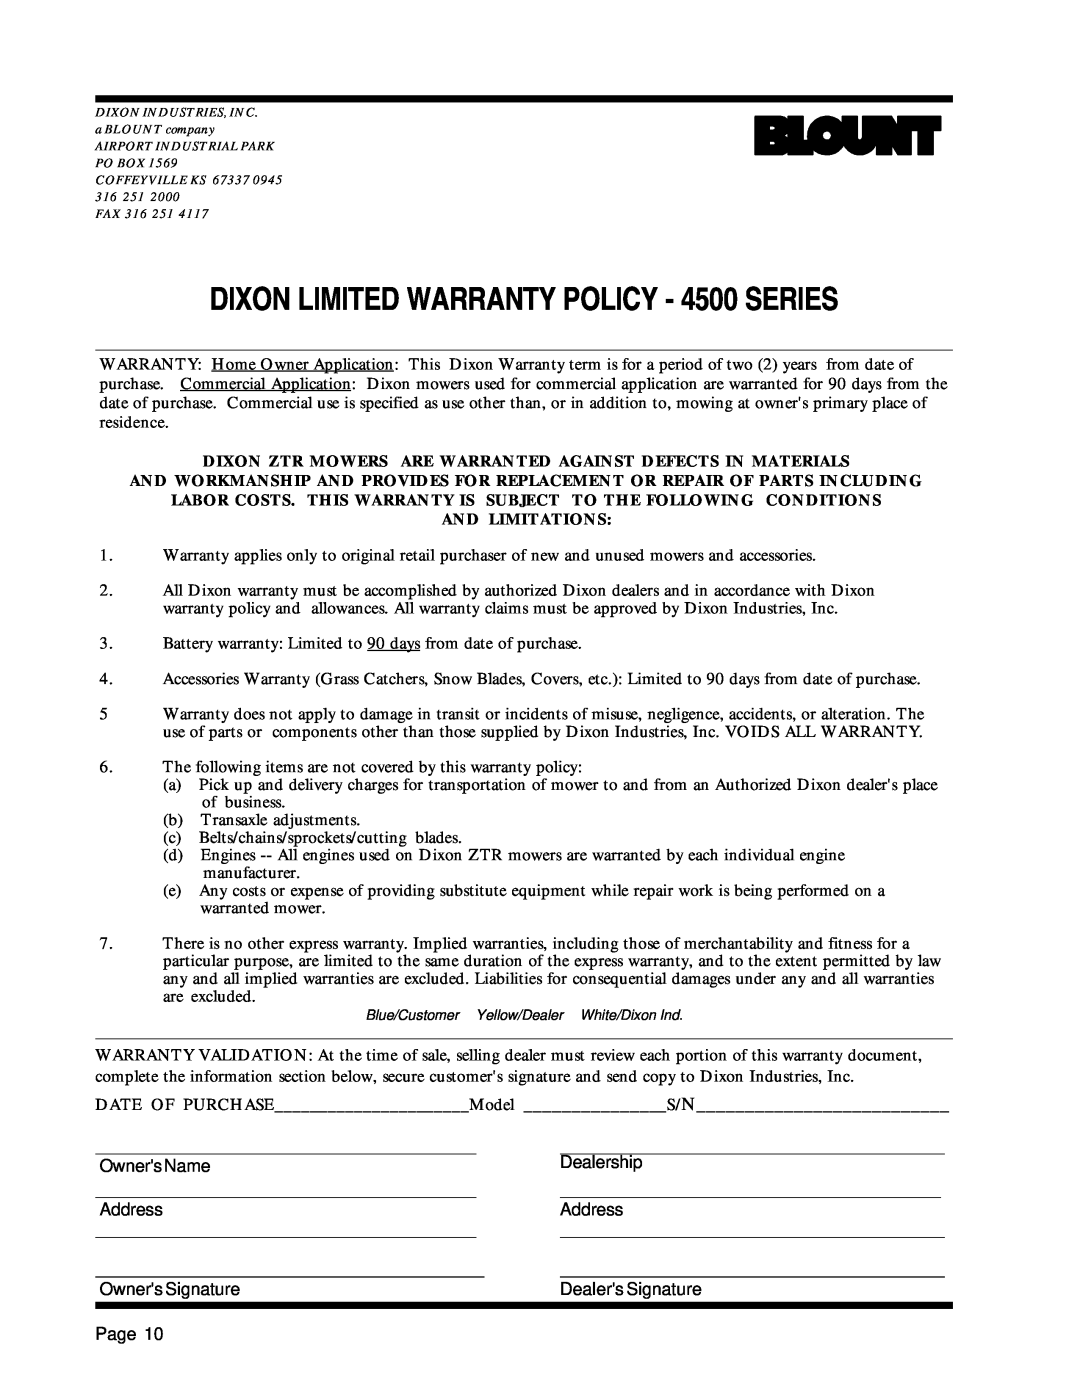 Dixon 13088-1100A DIXON LIMITED WARRANTY POLICY - 4500 SERIES, Dixon Ztr Mowers Are Warranted Against Defects In Materials 